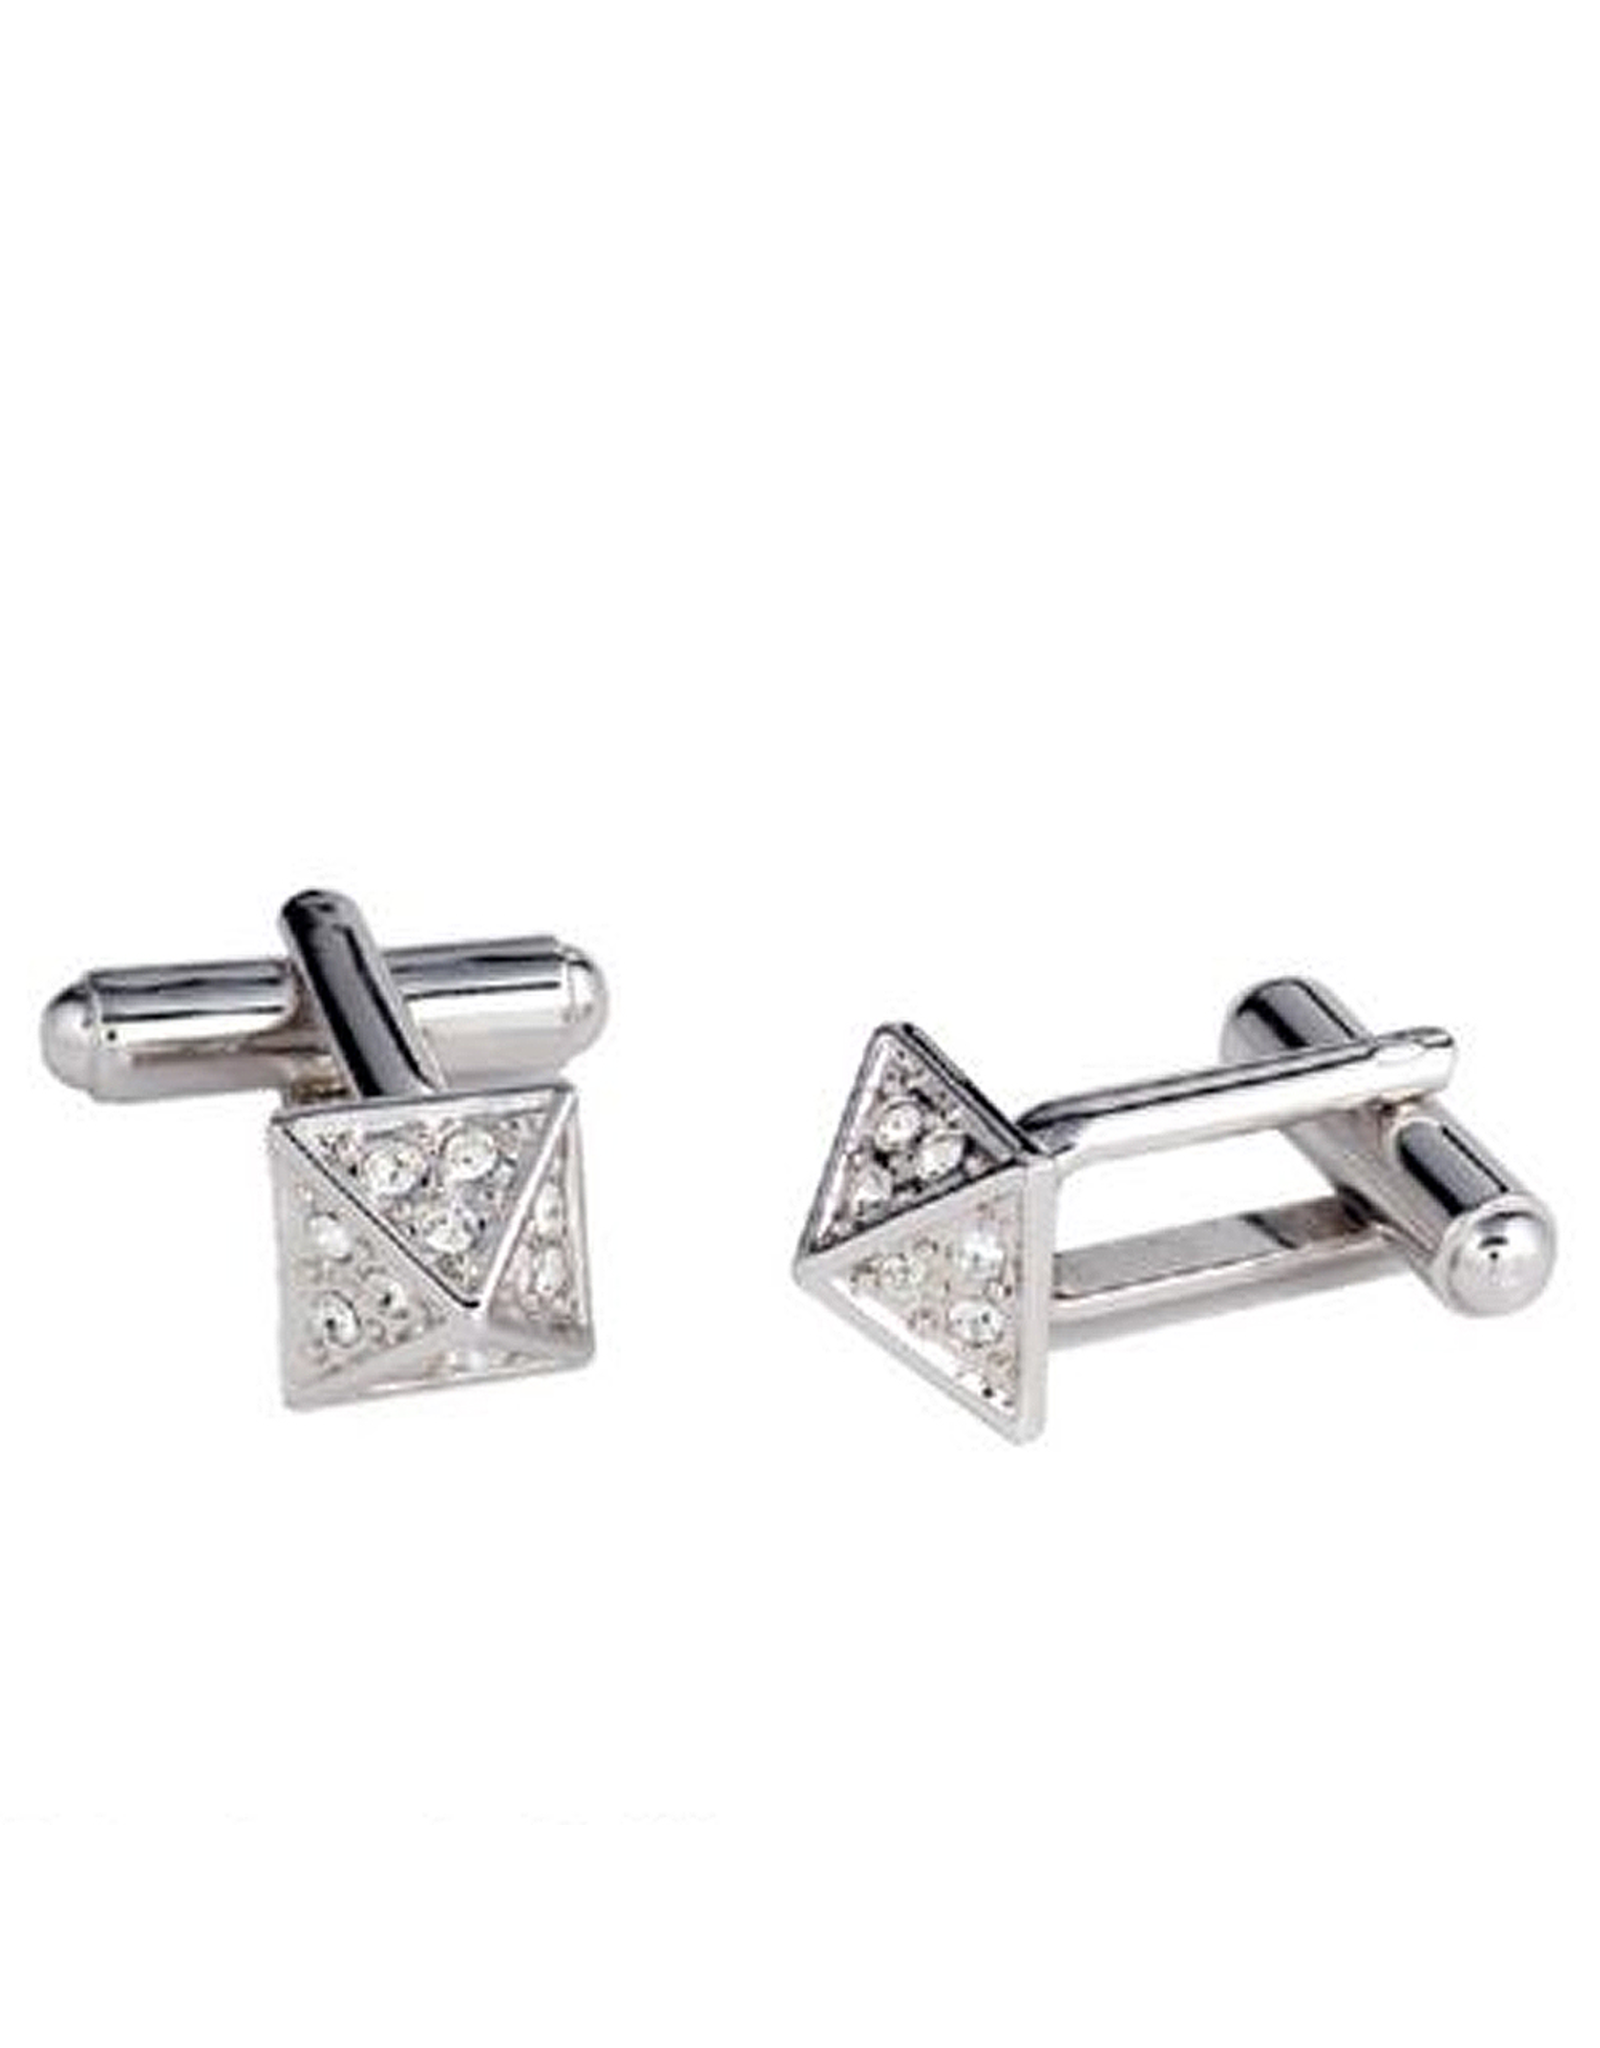 Annaleece Cuff Links Apex Silver w Crystals by Annaleece Mens Collection